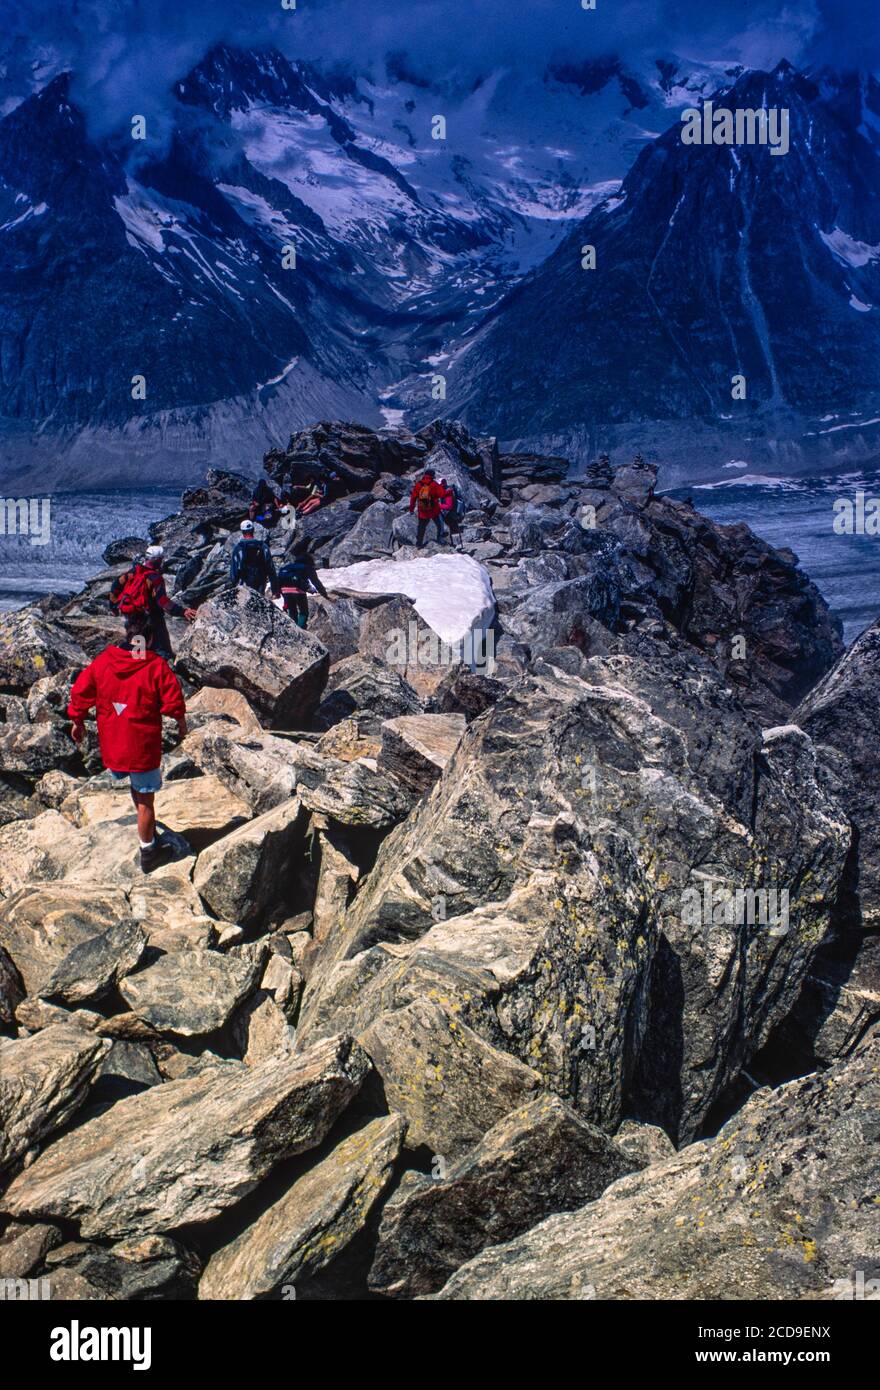 Visitors scramble over boulders at the summit of the Eggishorn in Switzerland to view the Aletschglacier, source of the Rhone, archive image from 1990s Stock Photo